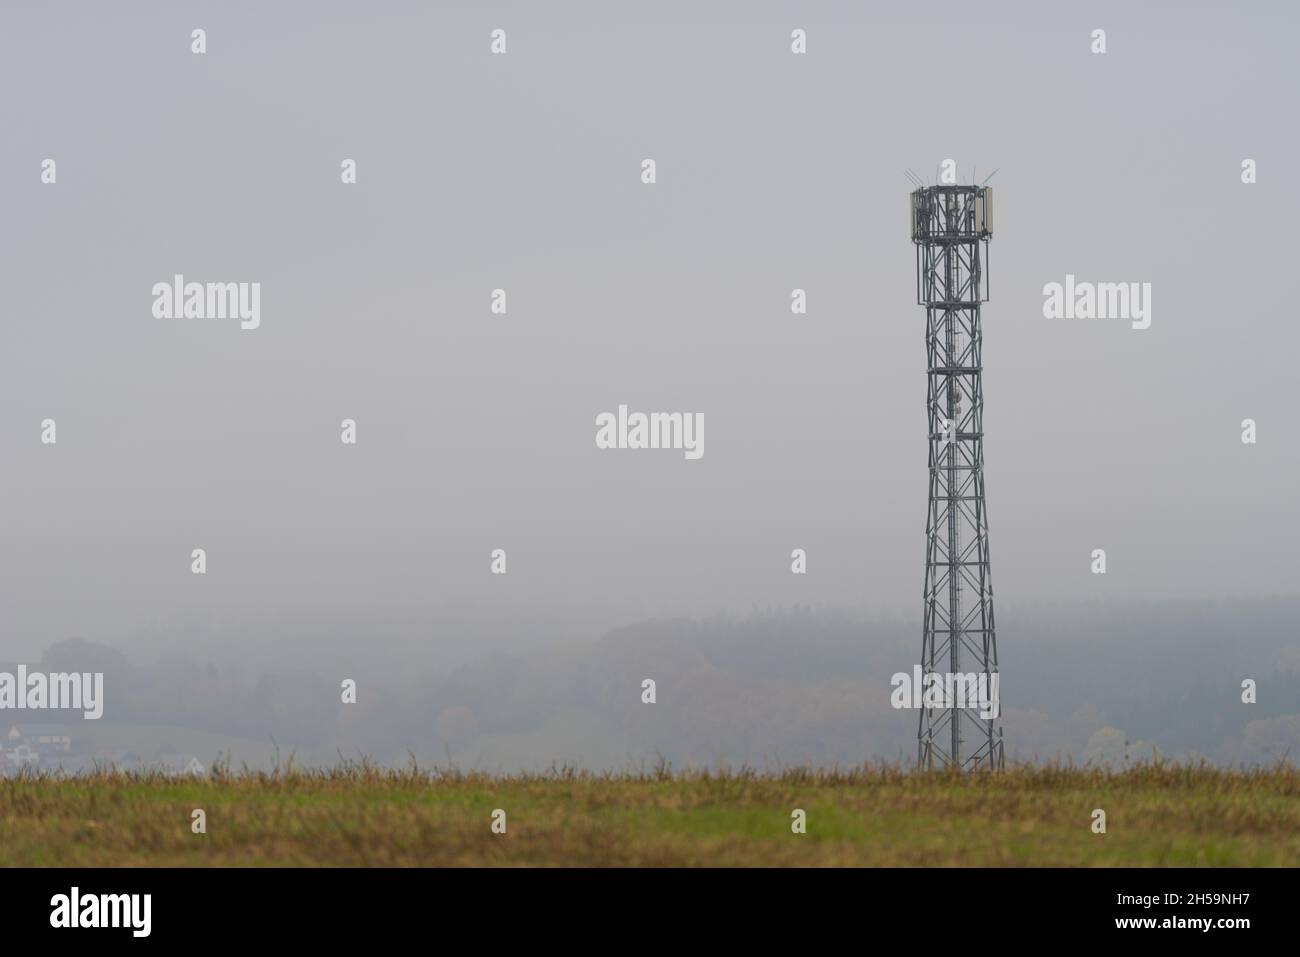 Mobile cell tower antenna mast providing mobile internet connection for rural area standing on empty barren field on grey overcast dark moody day Stock Photo